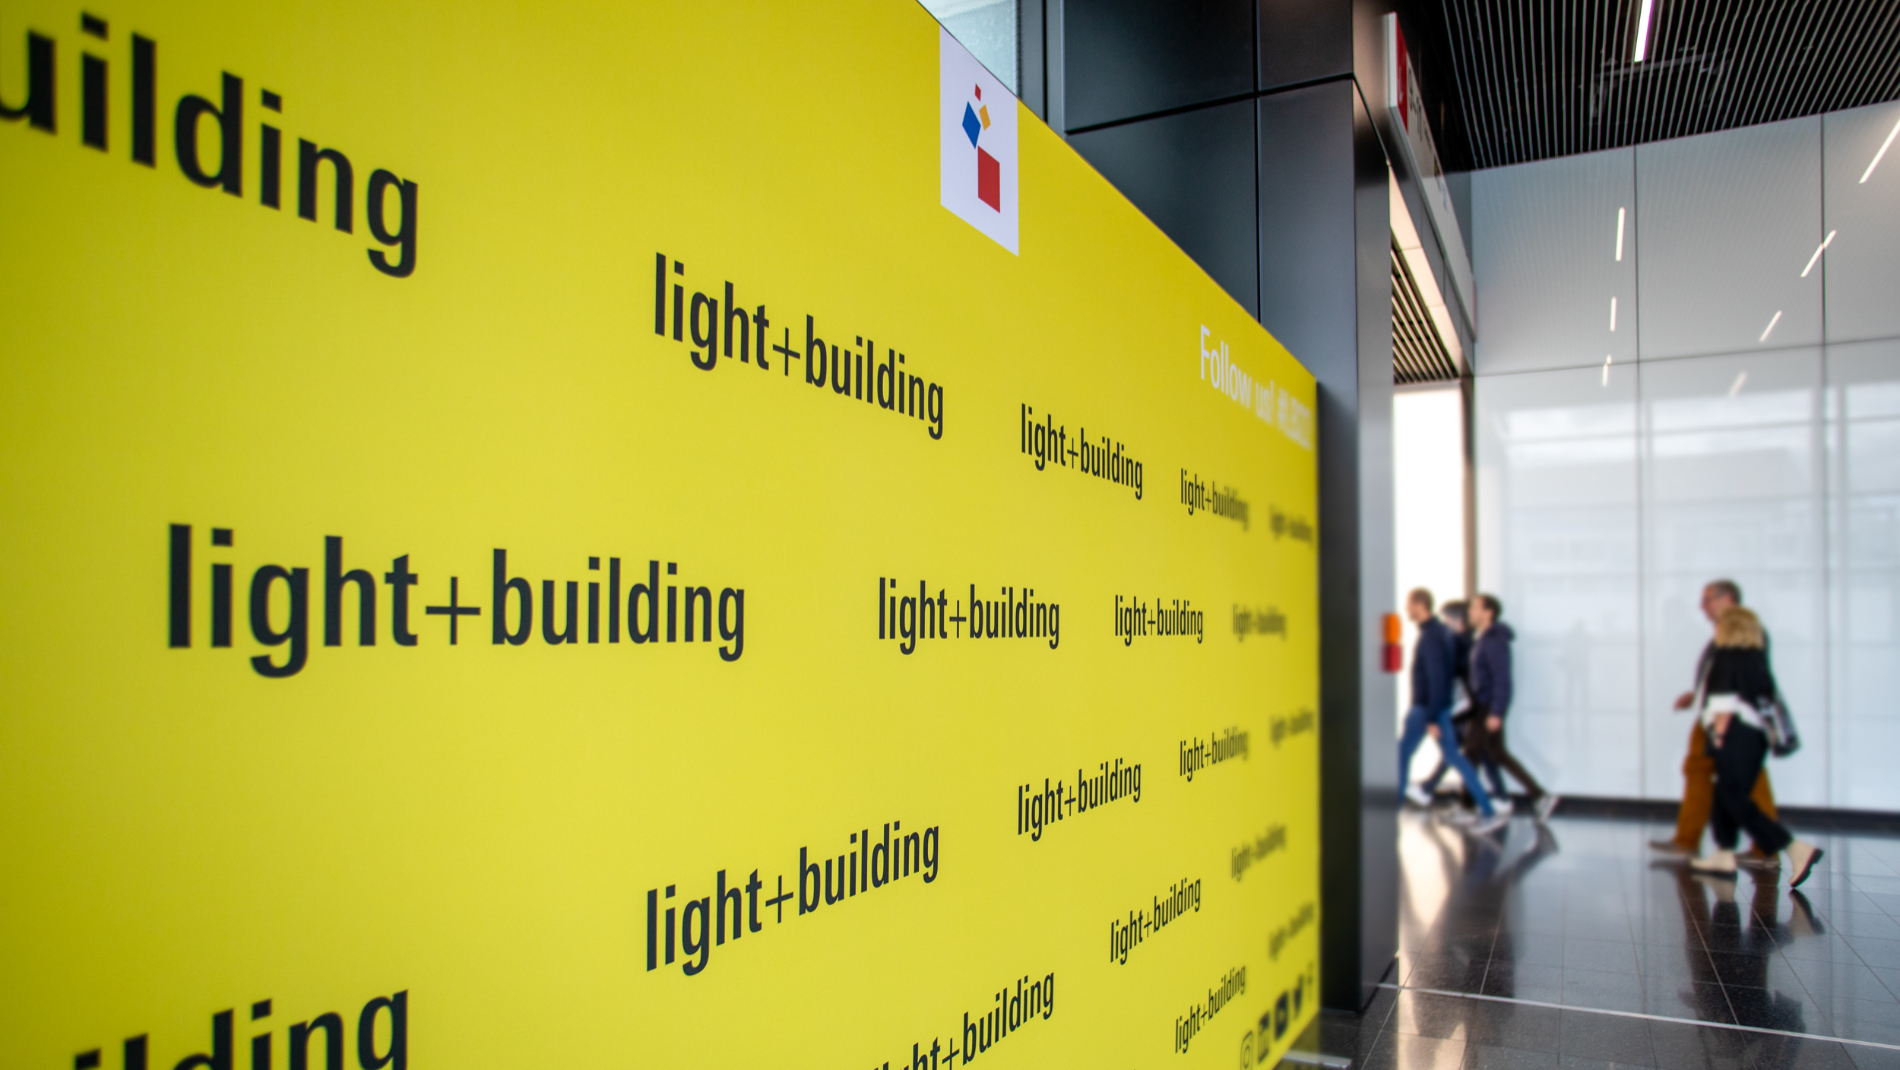 Light + Building covers the spectrum from intelligent lighting technology to future-oriented home and building-services technology. (Sources: Messe Frankfurt Exhibition GmbH)